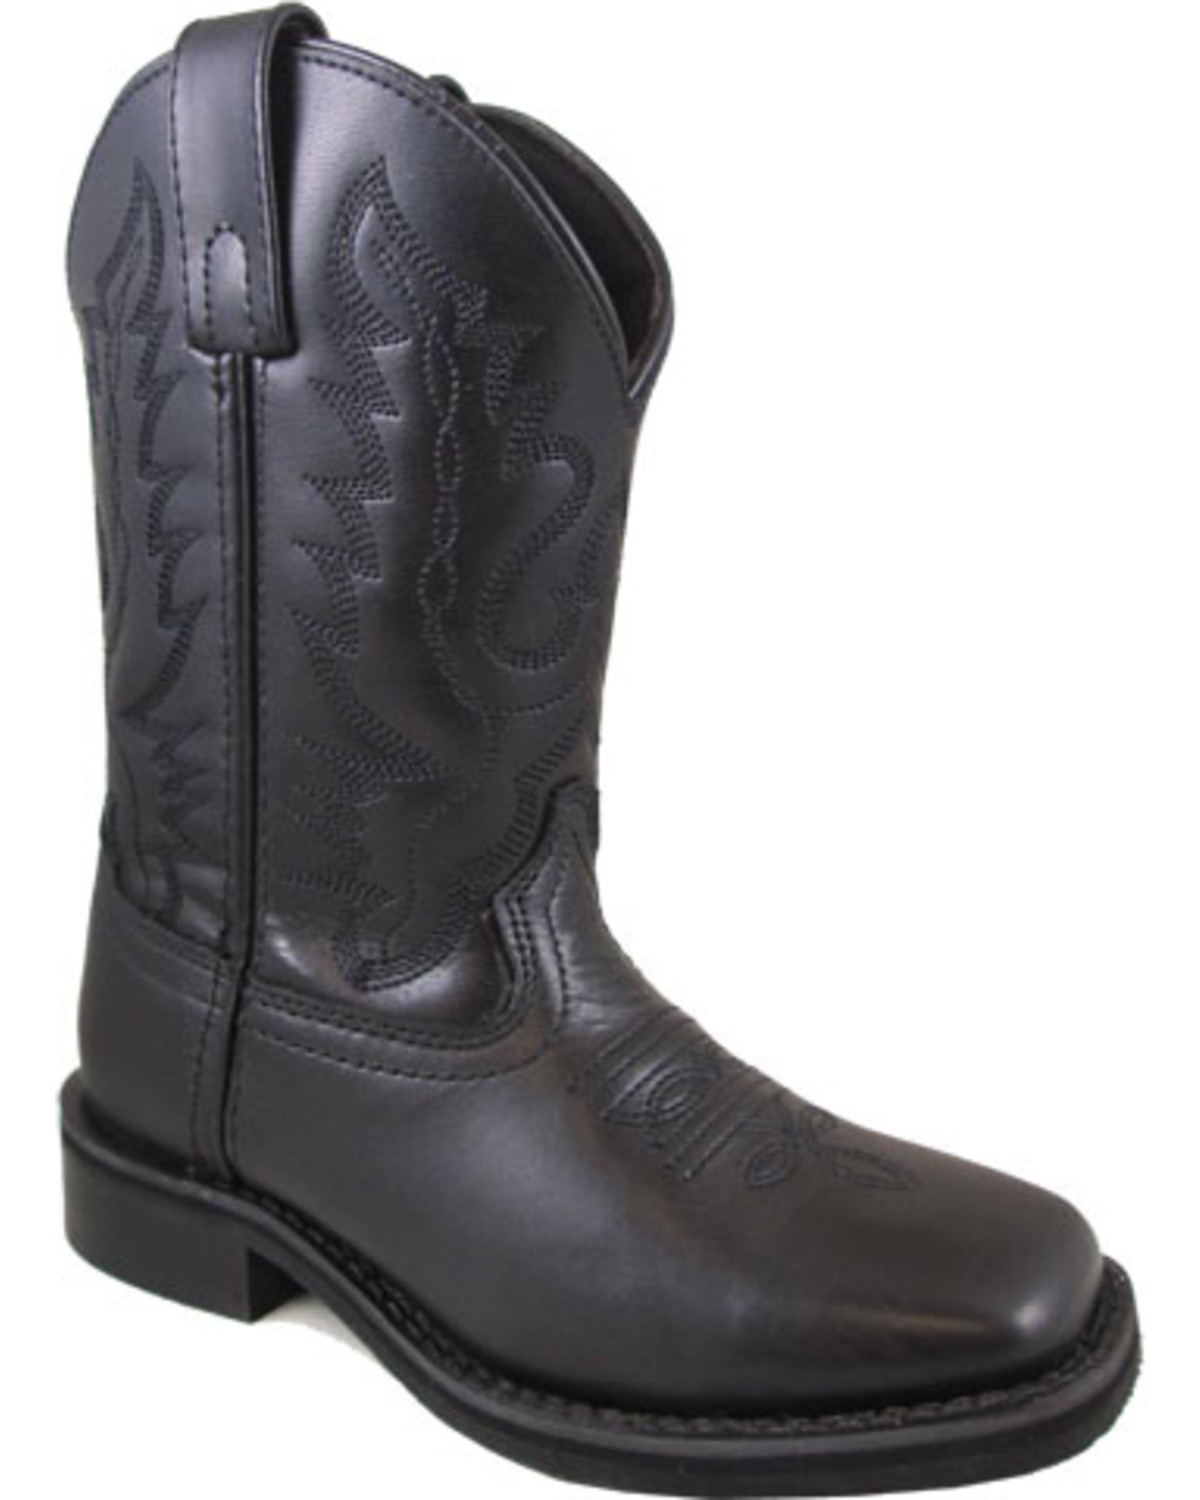 Smoky Mountain YOUTH Outlaw Black Leather Square Toe Western Cowboy Boots 